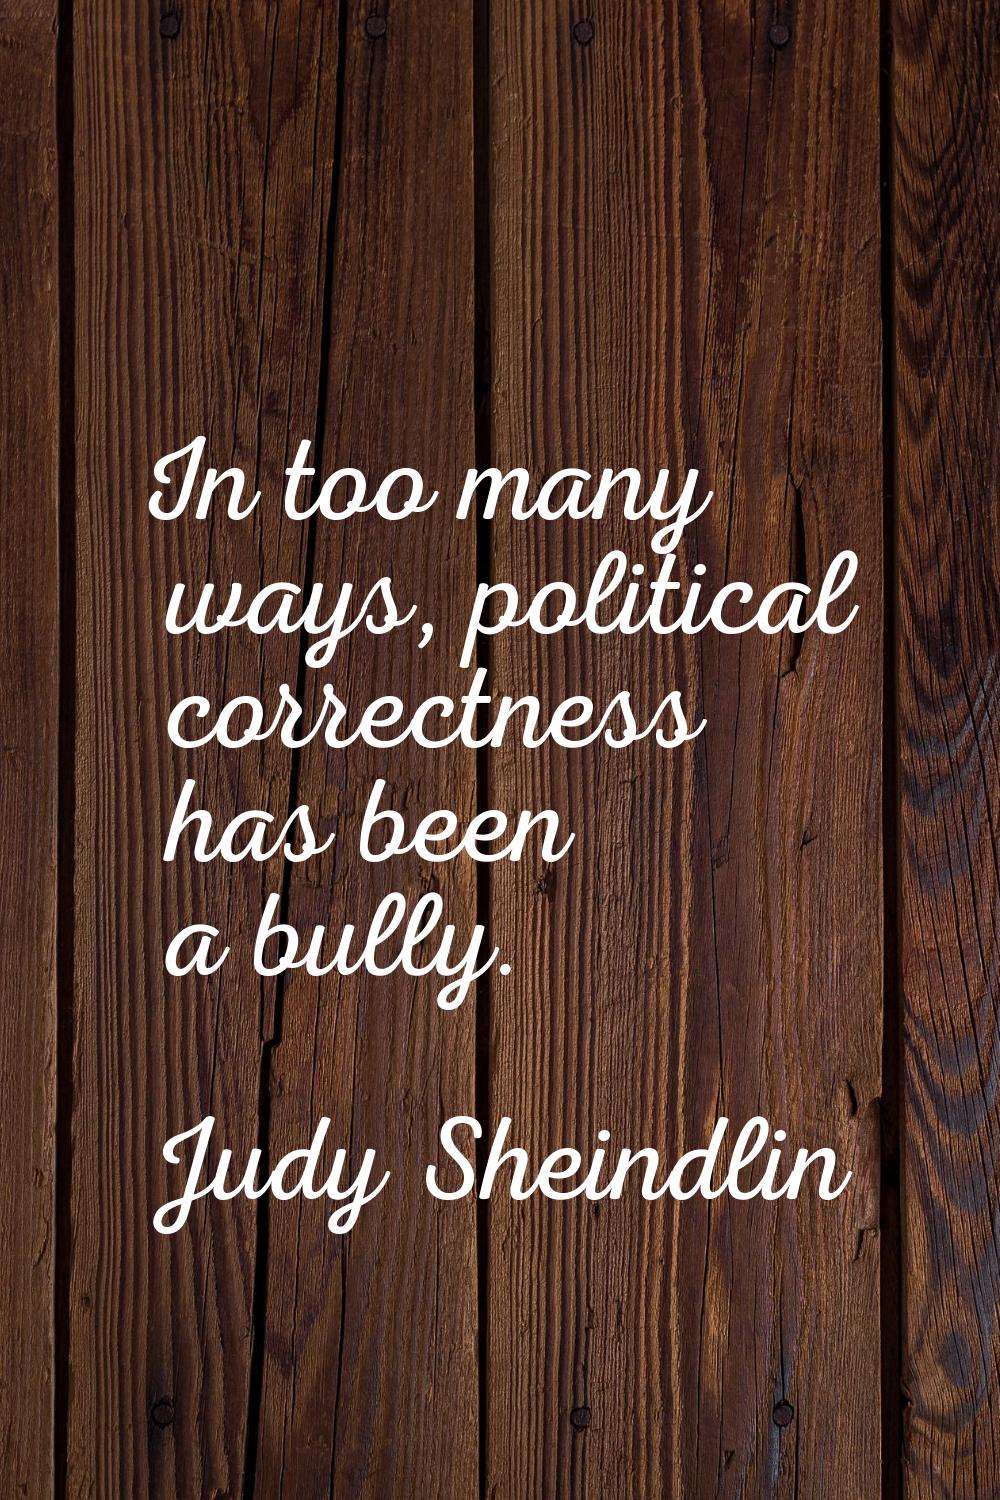 In too many ways, political correctness has been a bully.